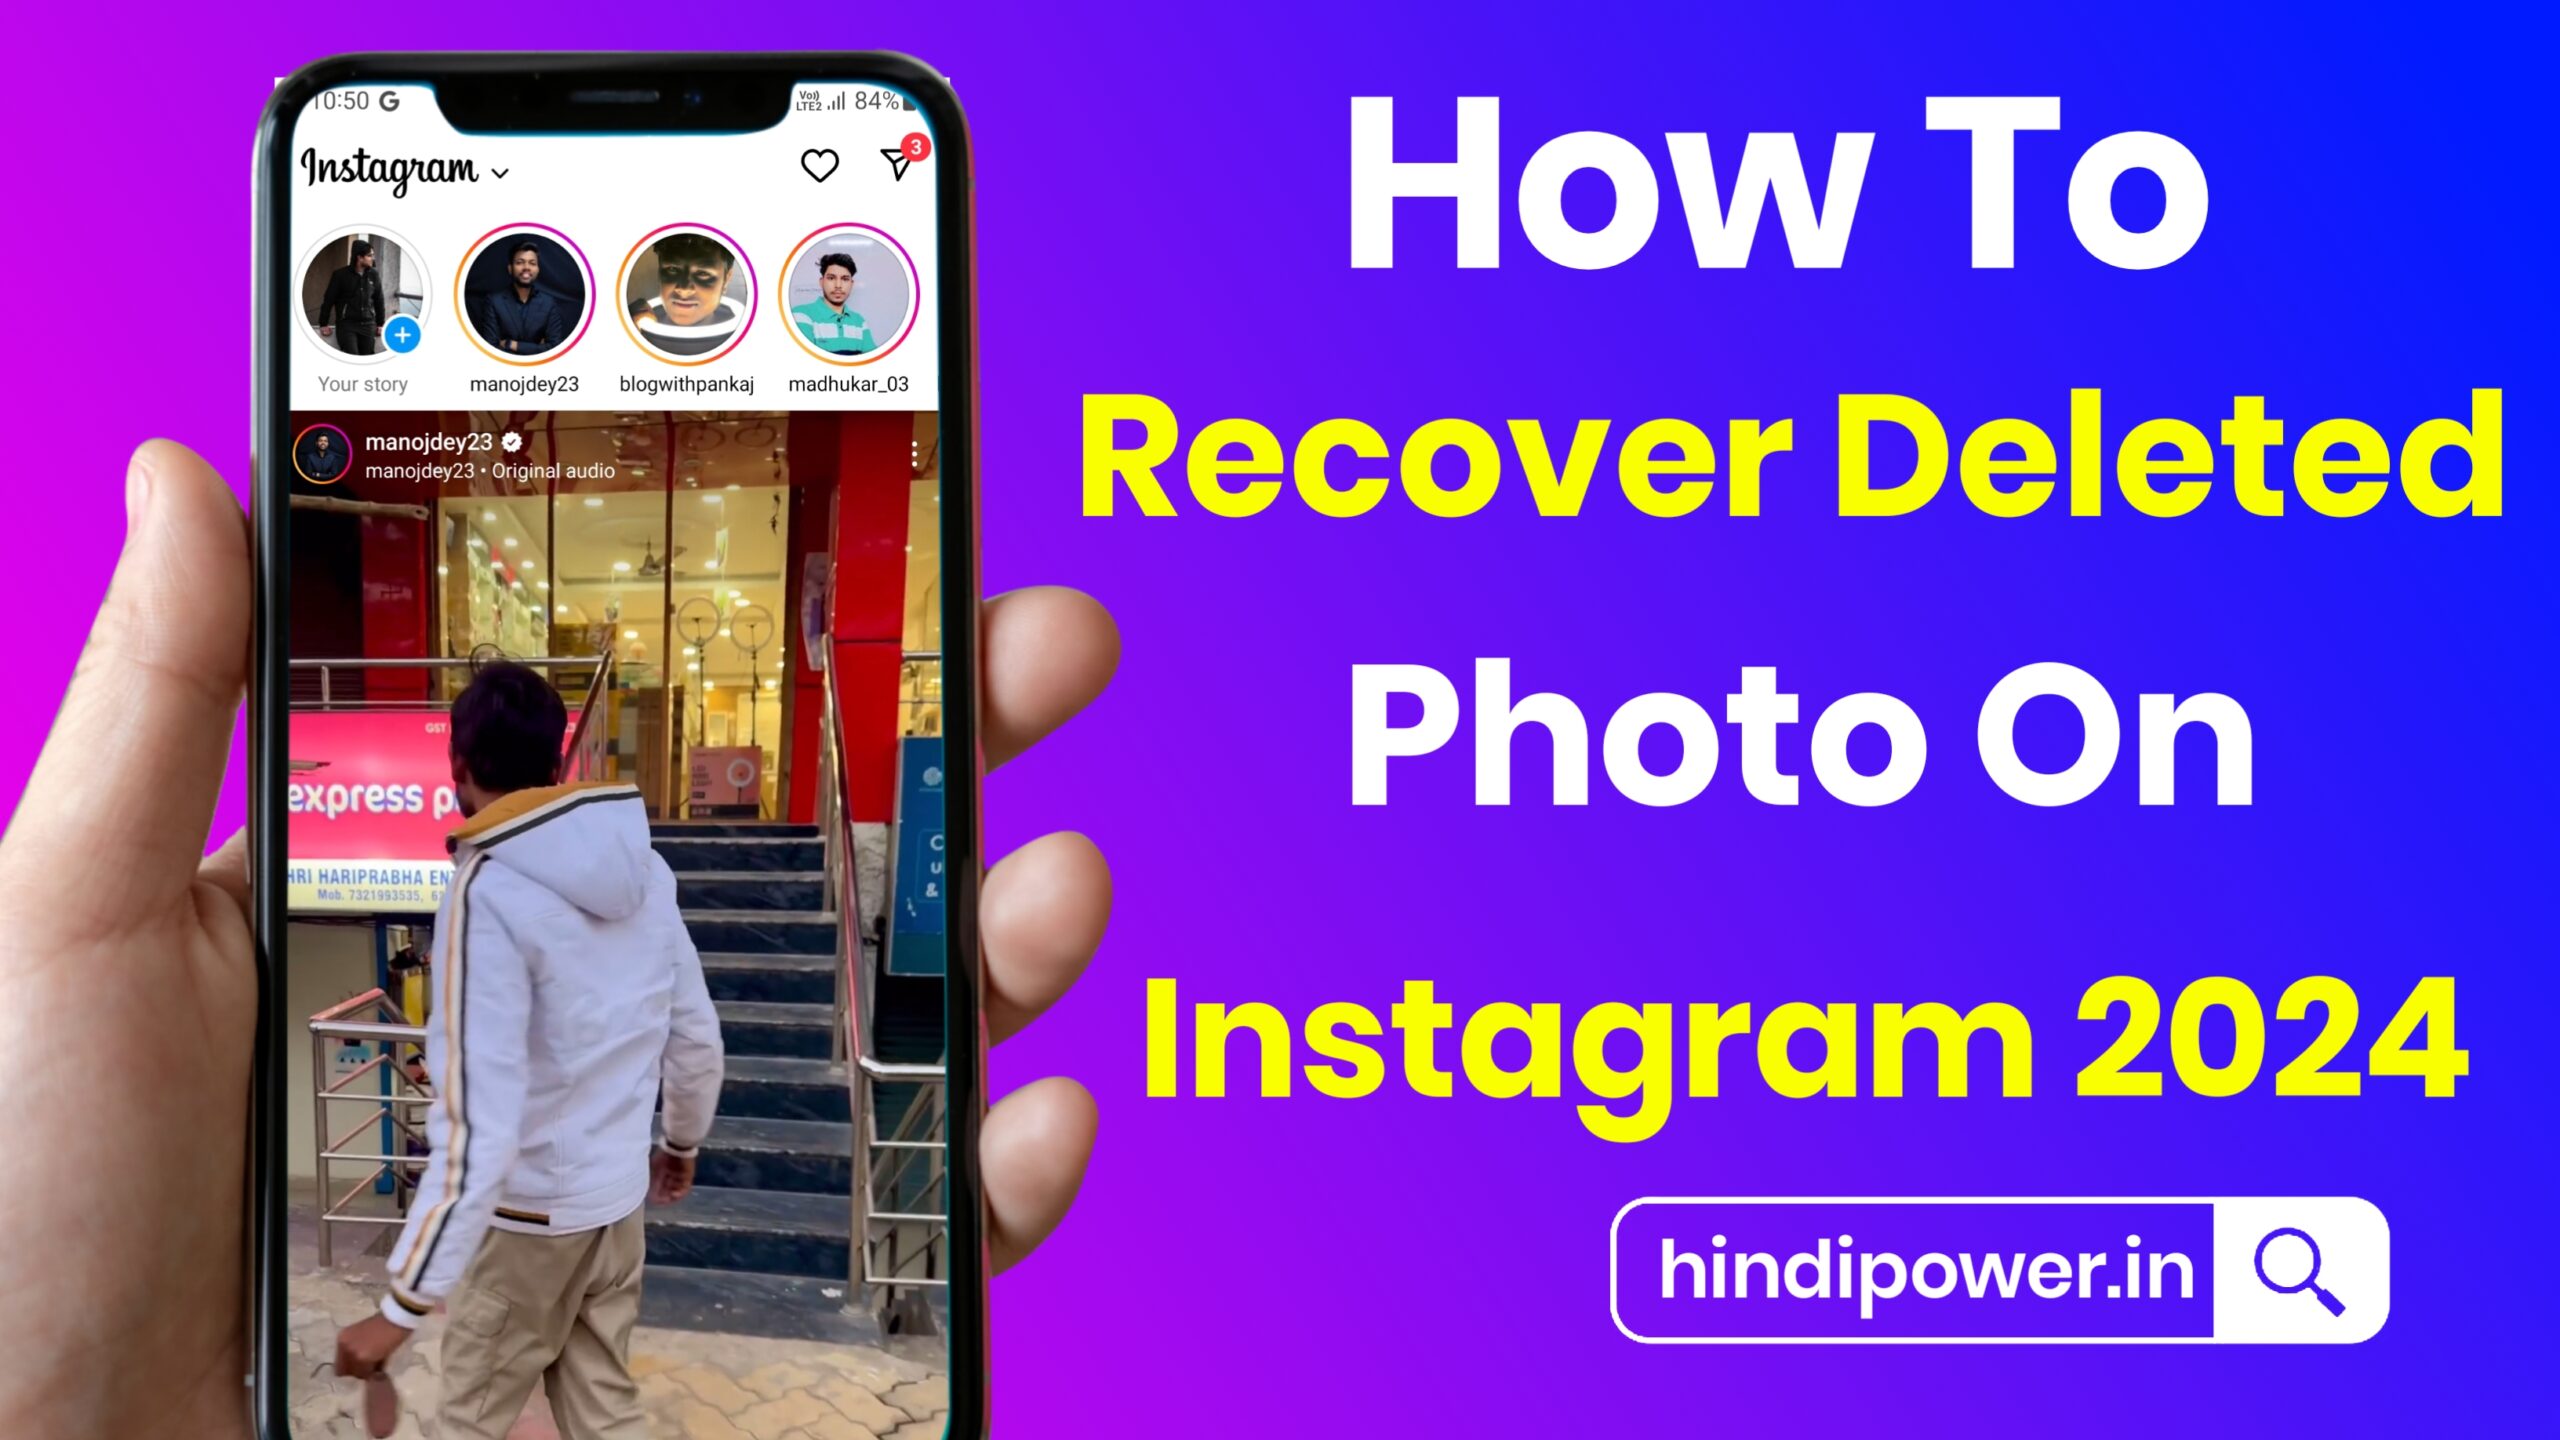 How To Recover Deleted Photo On Instagram 2024 - सिर्फ 1 मिनट में